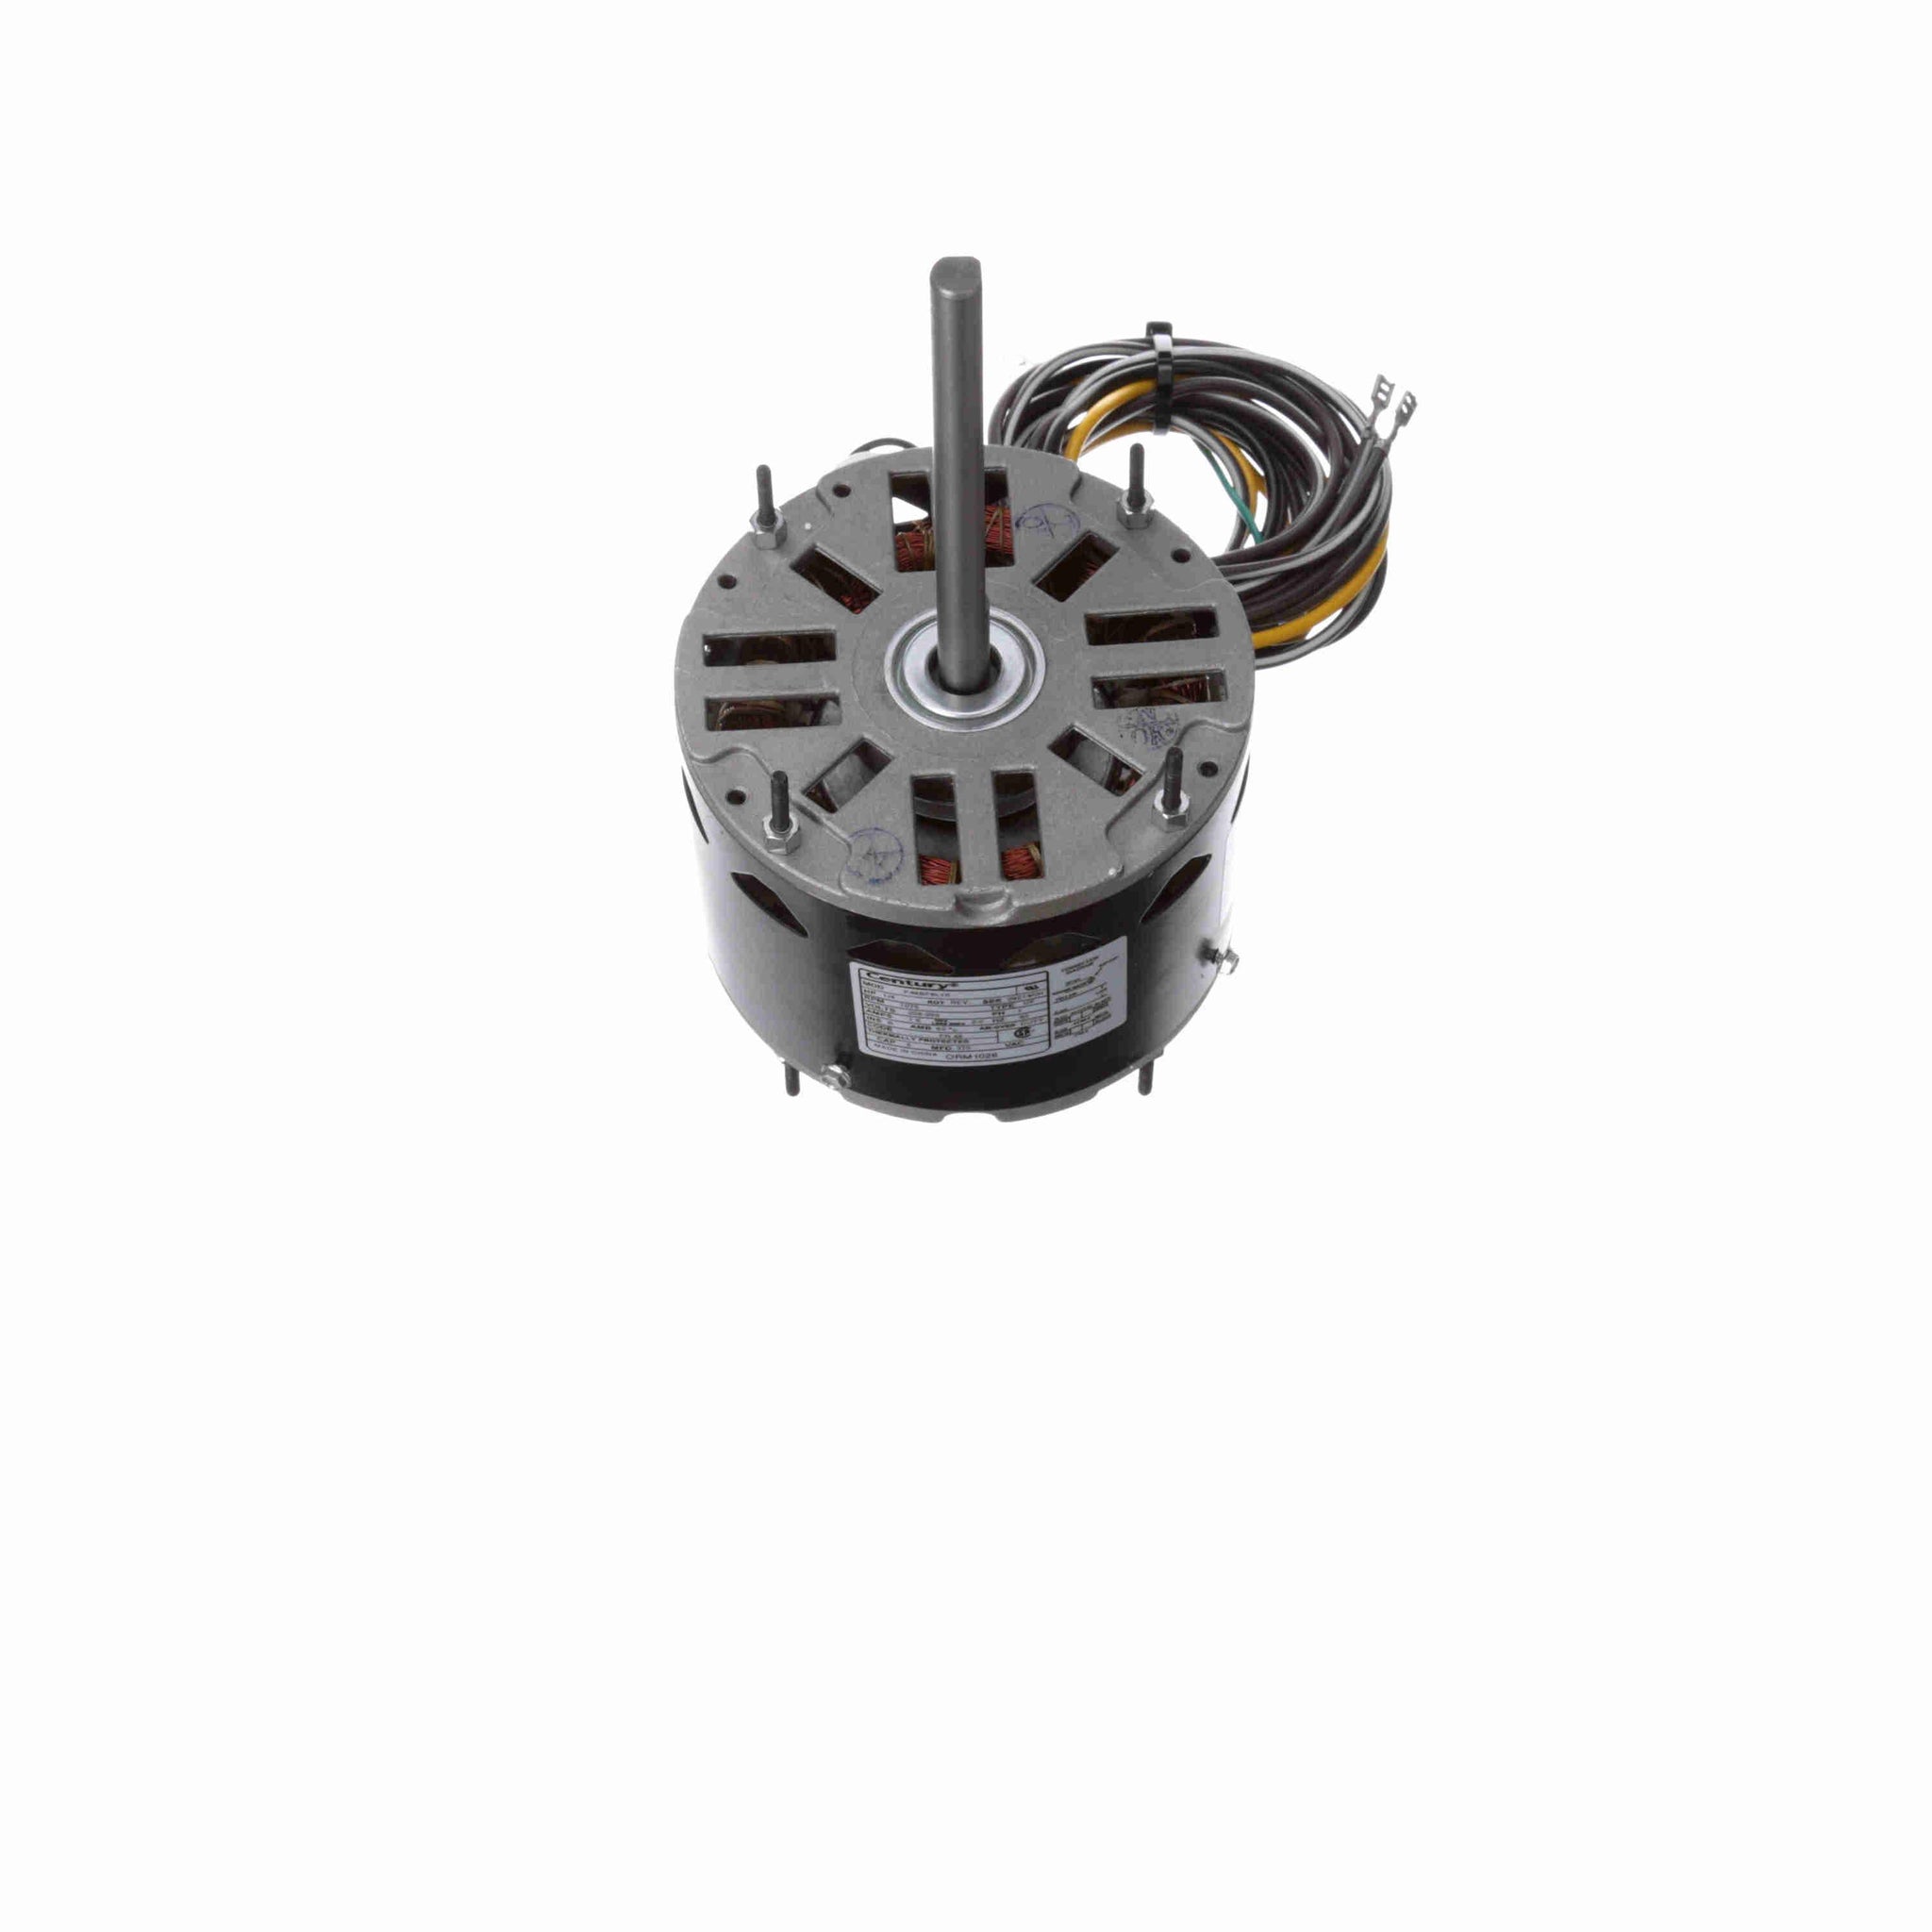 ORM1026 - 1/4 HP OEM Replacement Motor, 1075 RPM, 208-230 Volts, 48 Frame, OAO - Hardware & Moreee